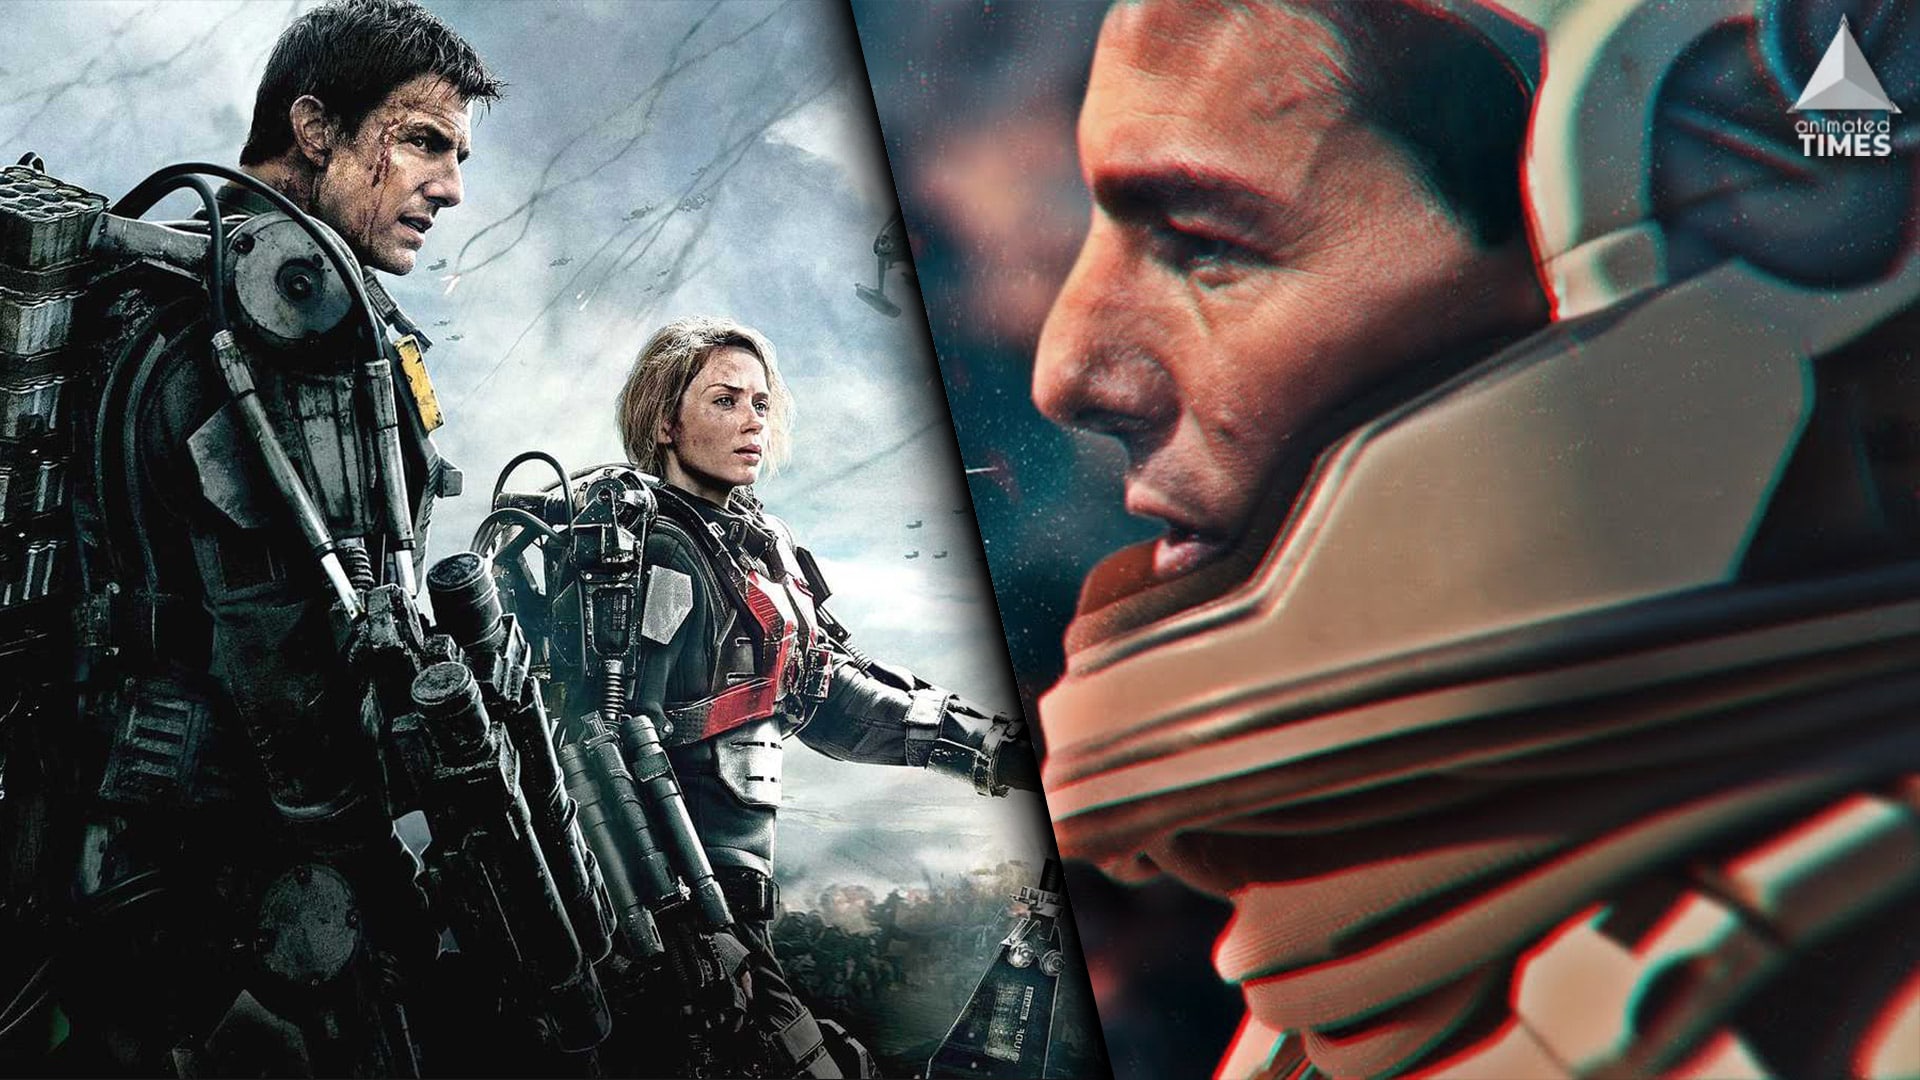 All Upcoming Movies of Tom Cruise You Should Be Excited For